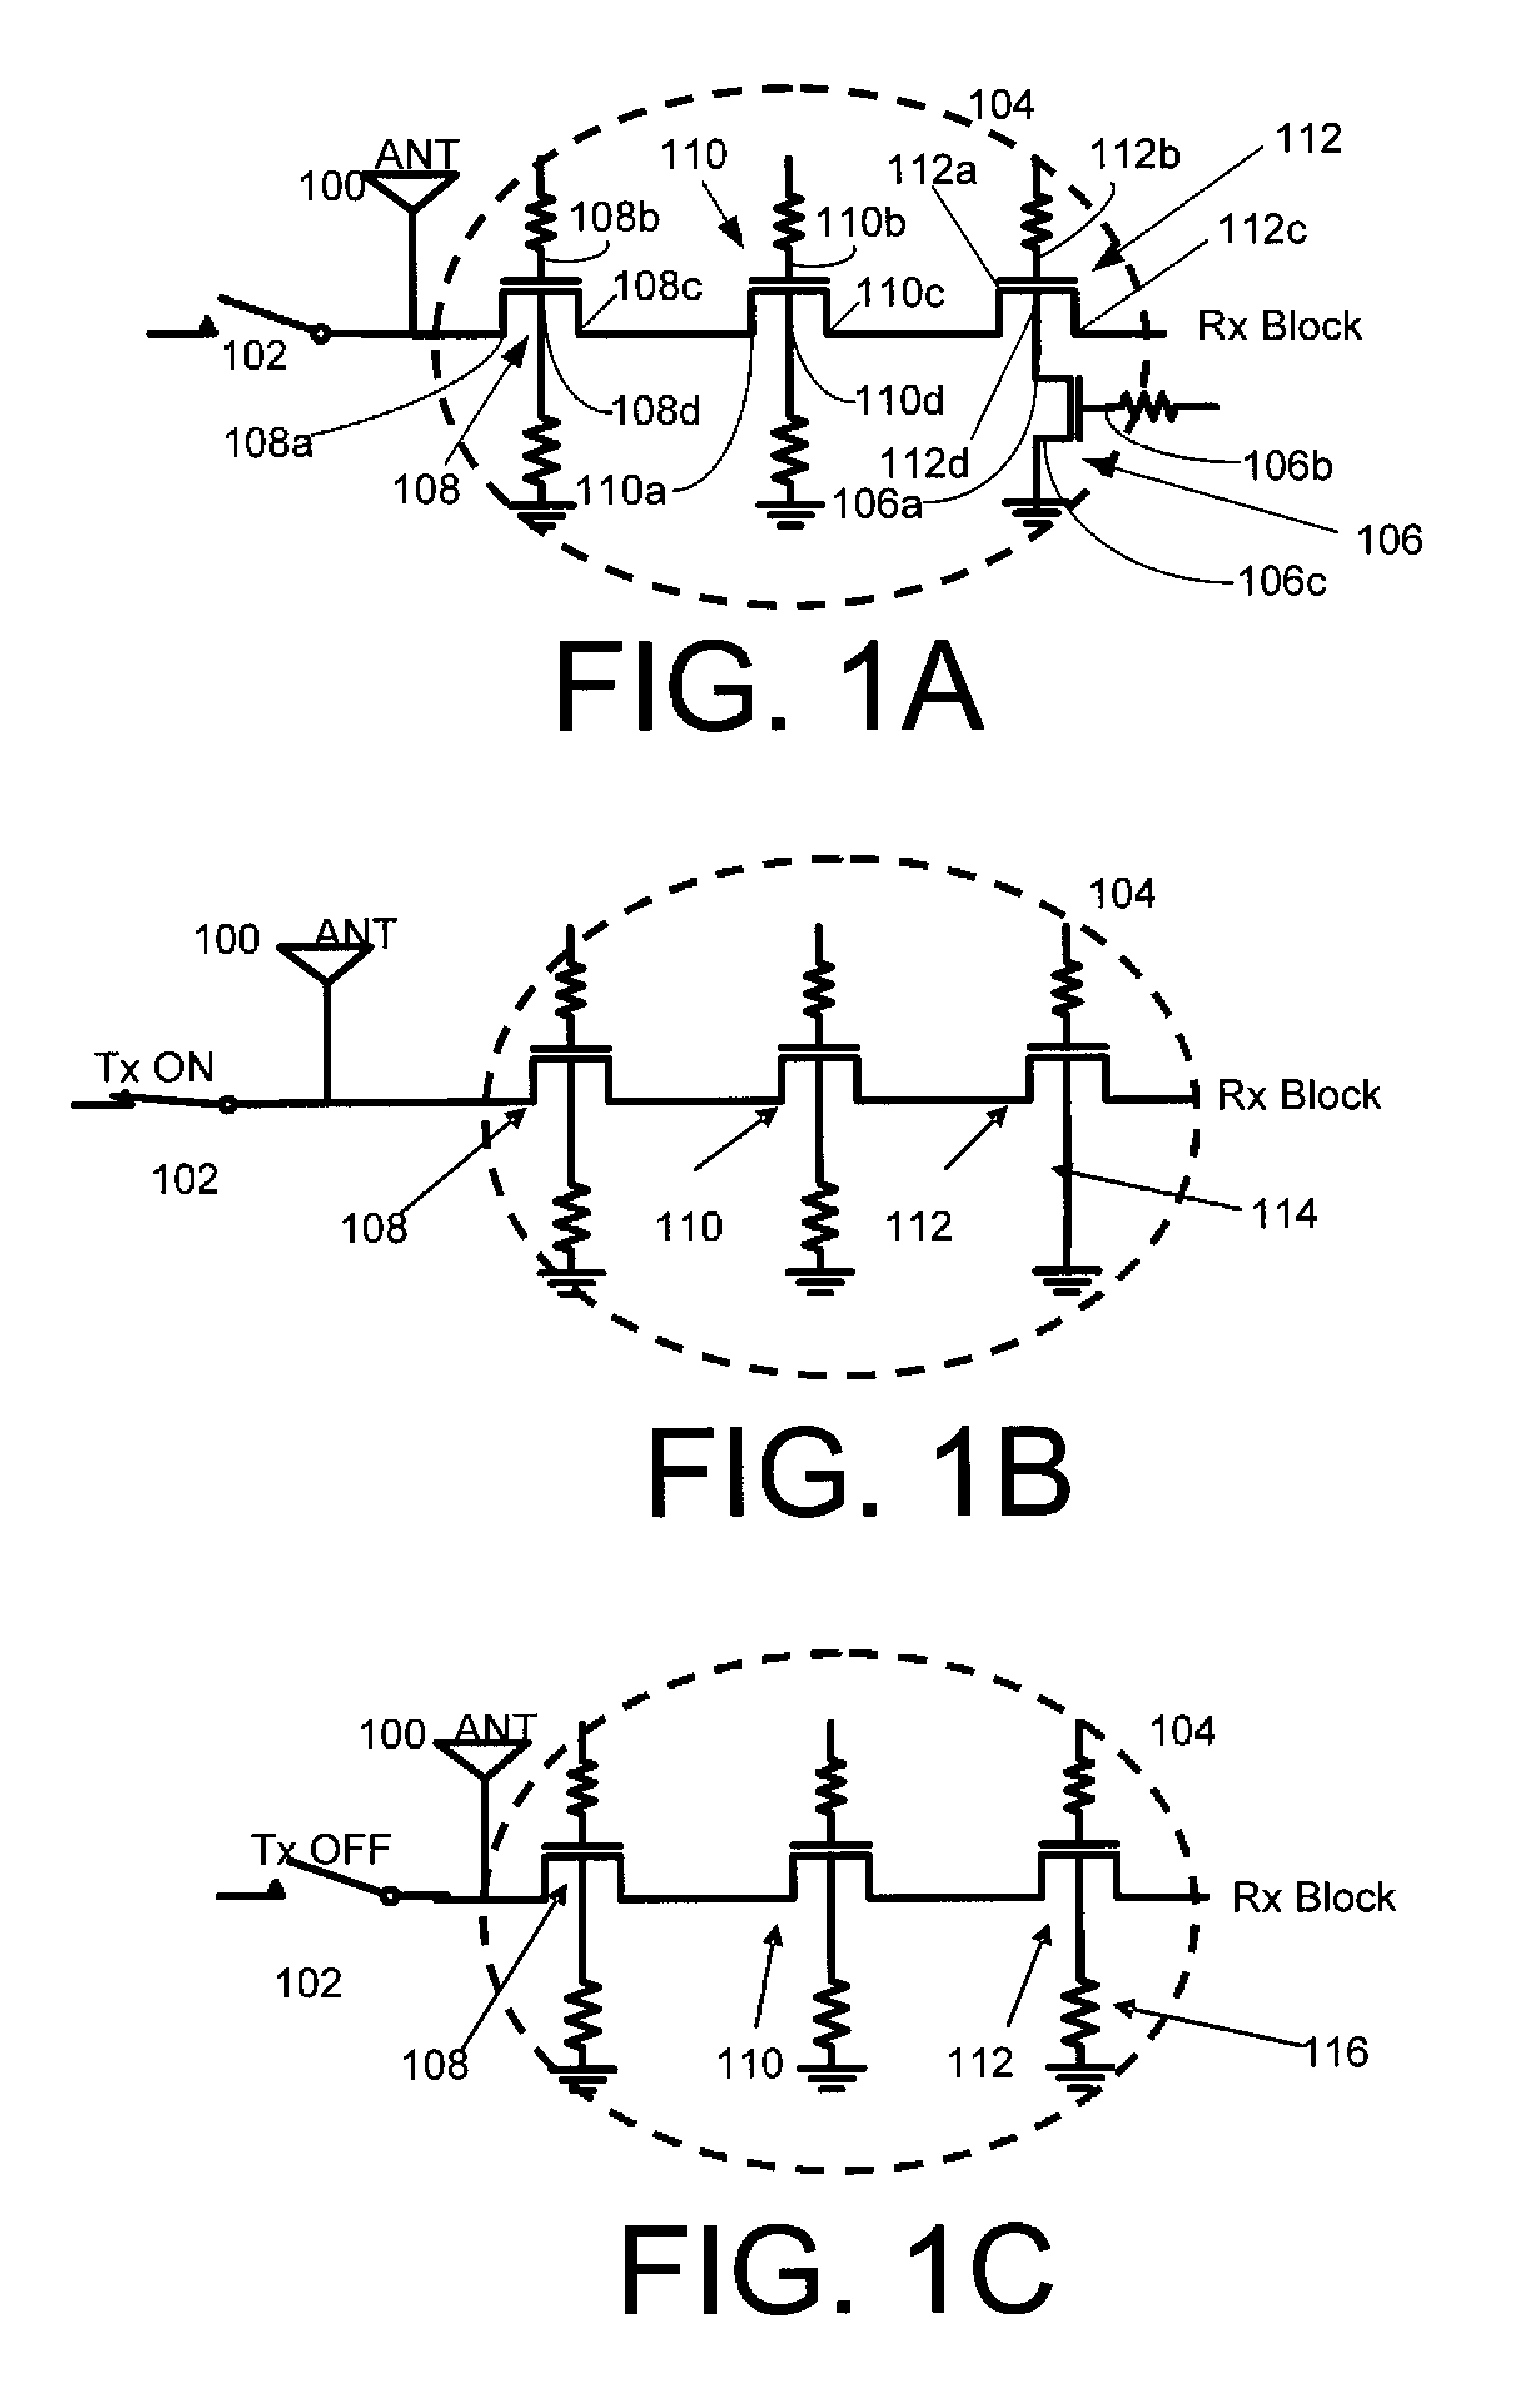 Systems, methods, and apparatuses for complementary metal oxide semiconductor (CMOS) antenna switches using body switching in multistacking structure